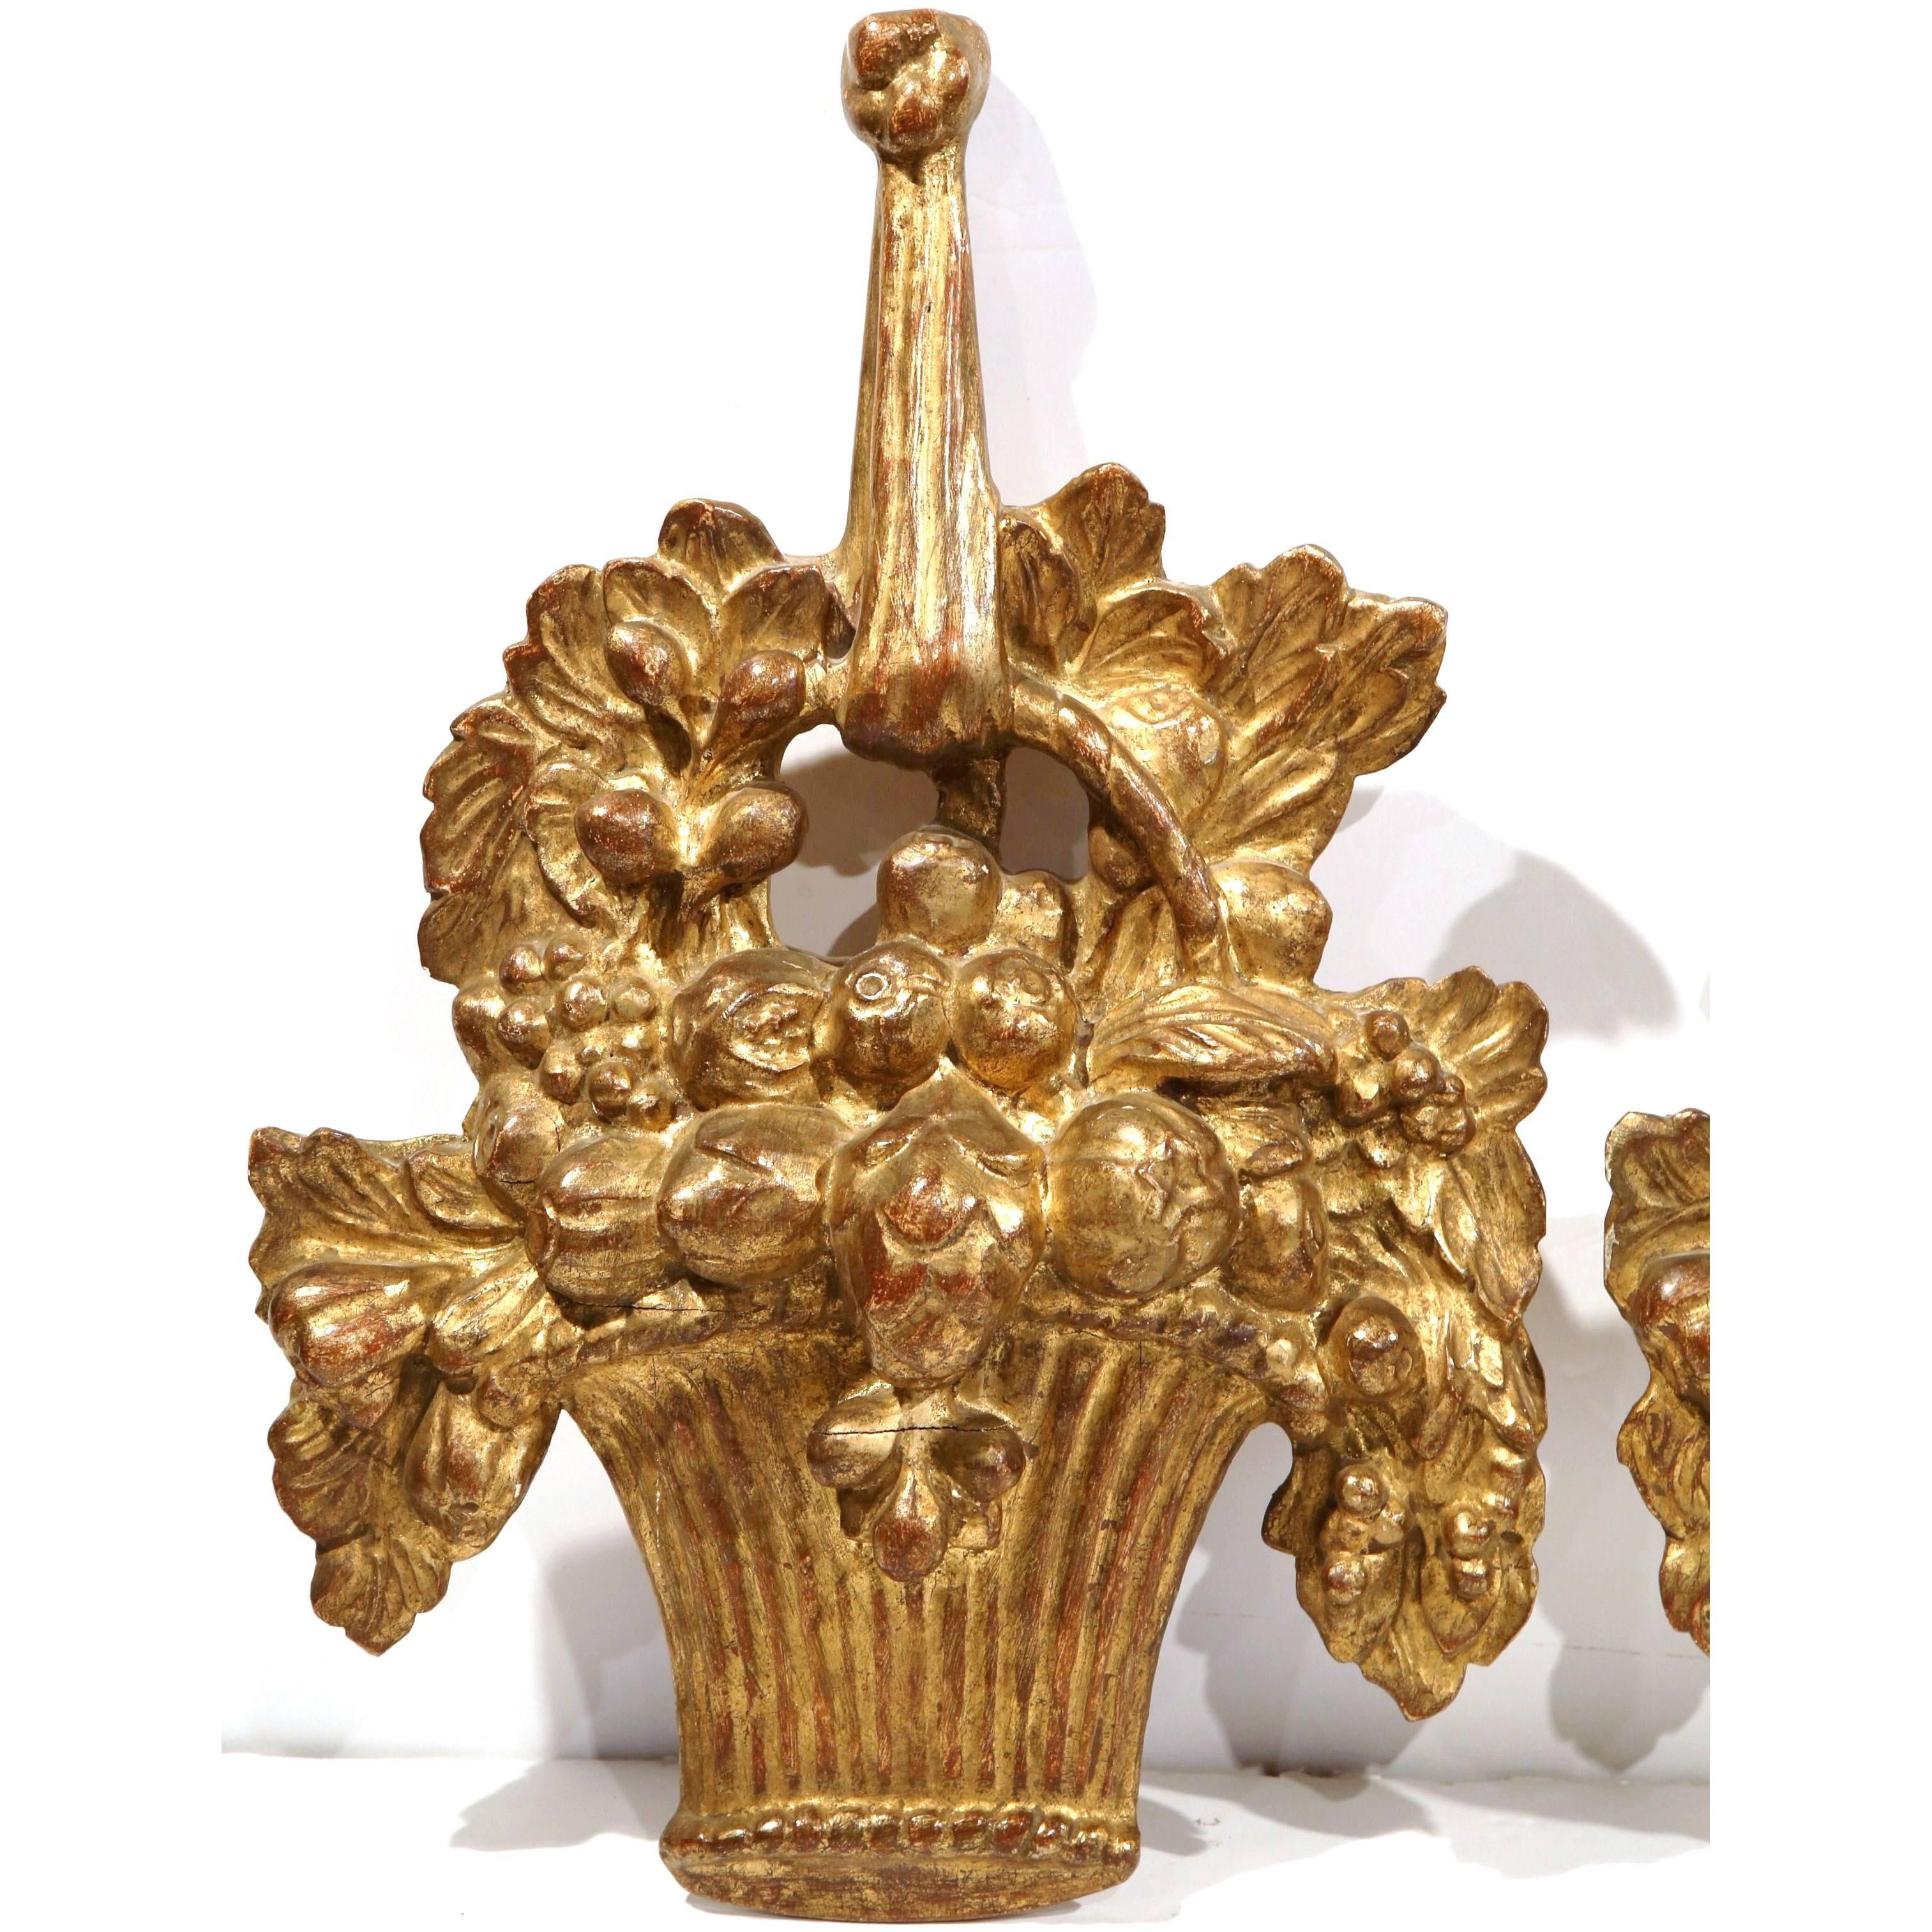 Hand-Carved Pair of Mid-20th Century Italian Decorative Carved Giltwood Wall Fruit Baskets